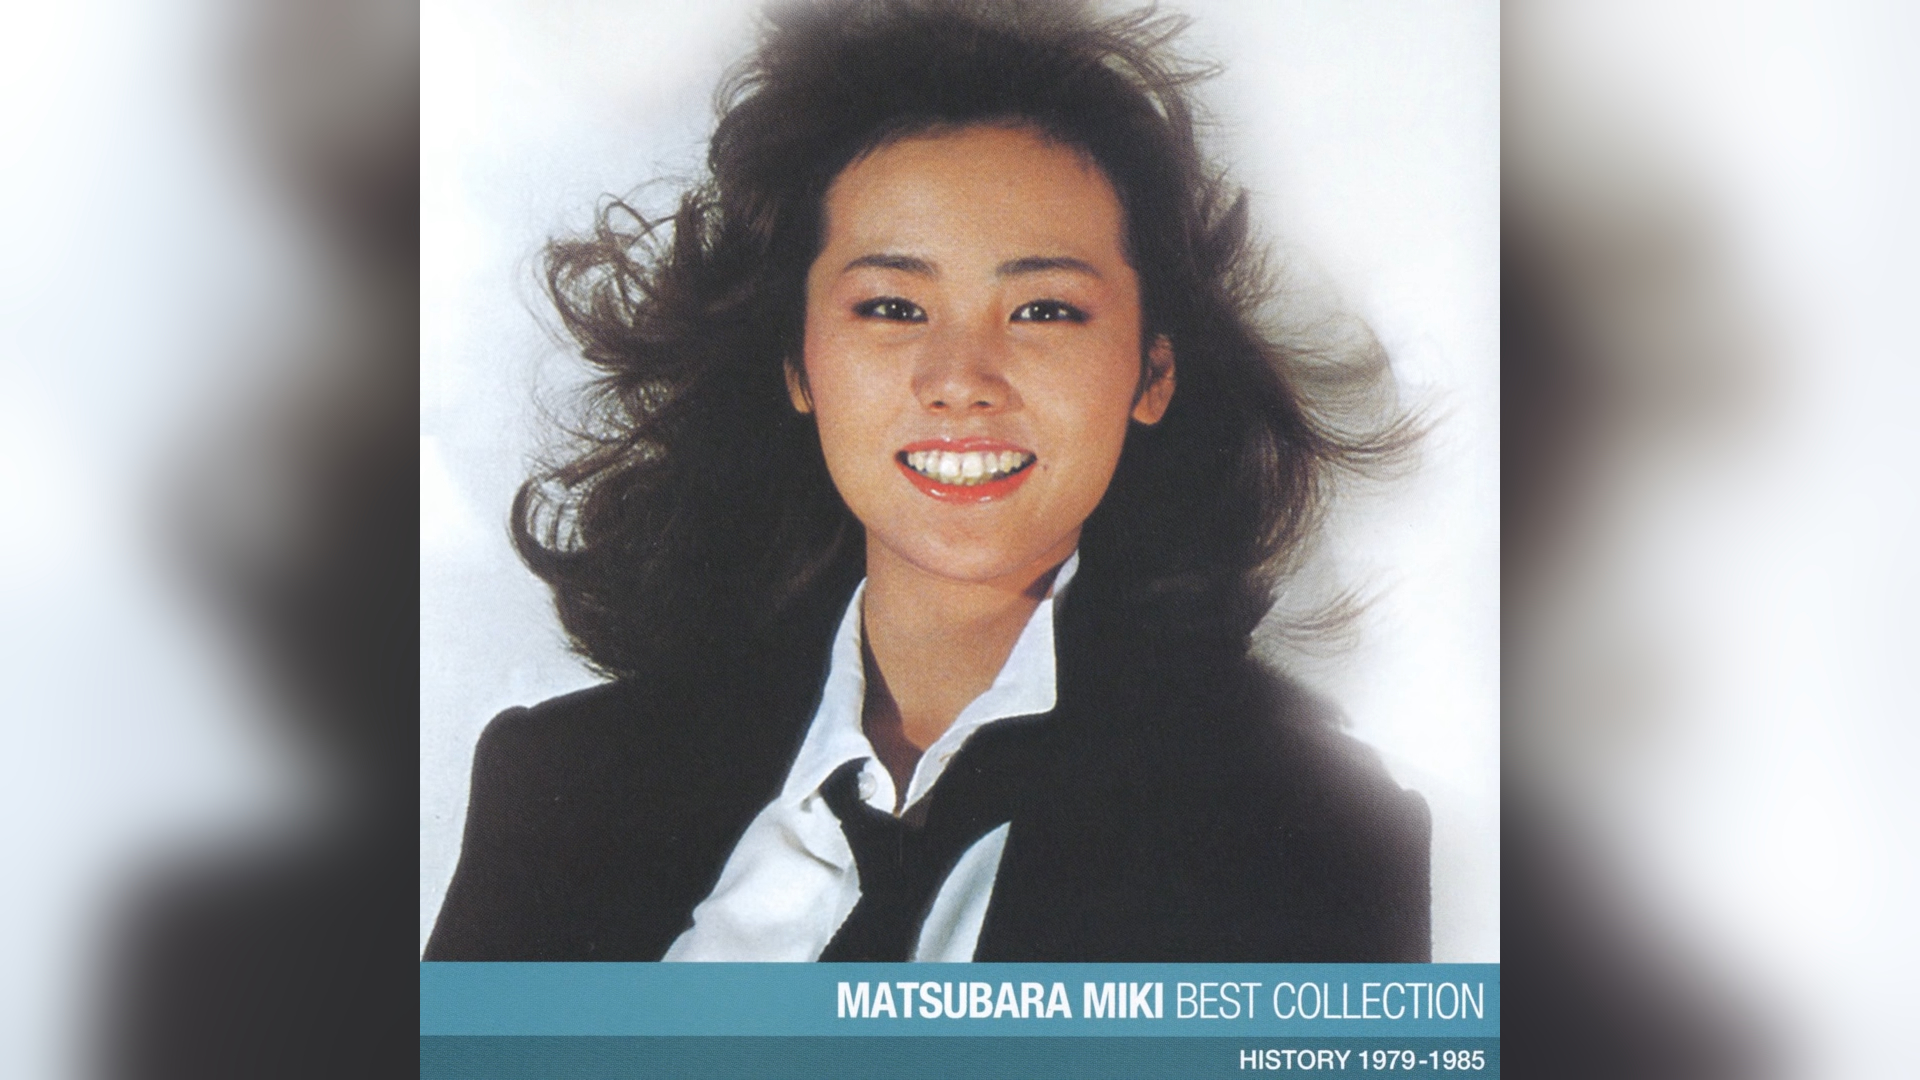 Miki Matsubara's Stay With Me